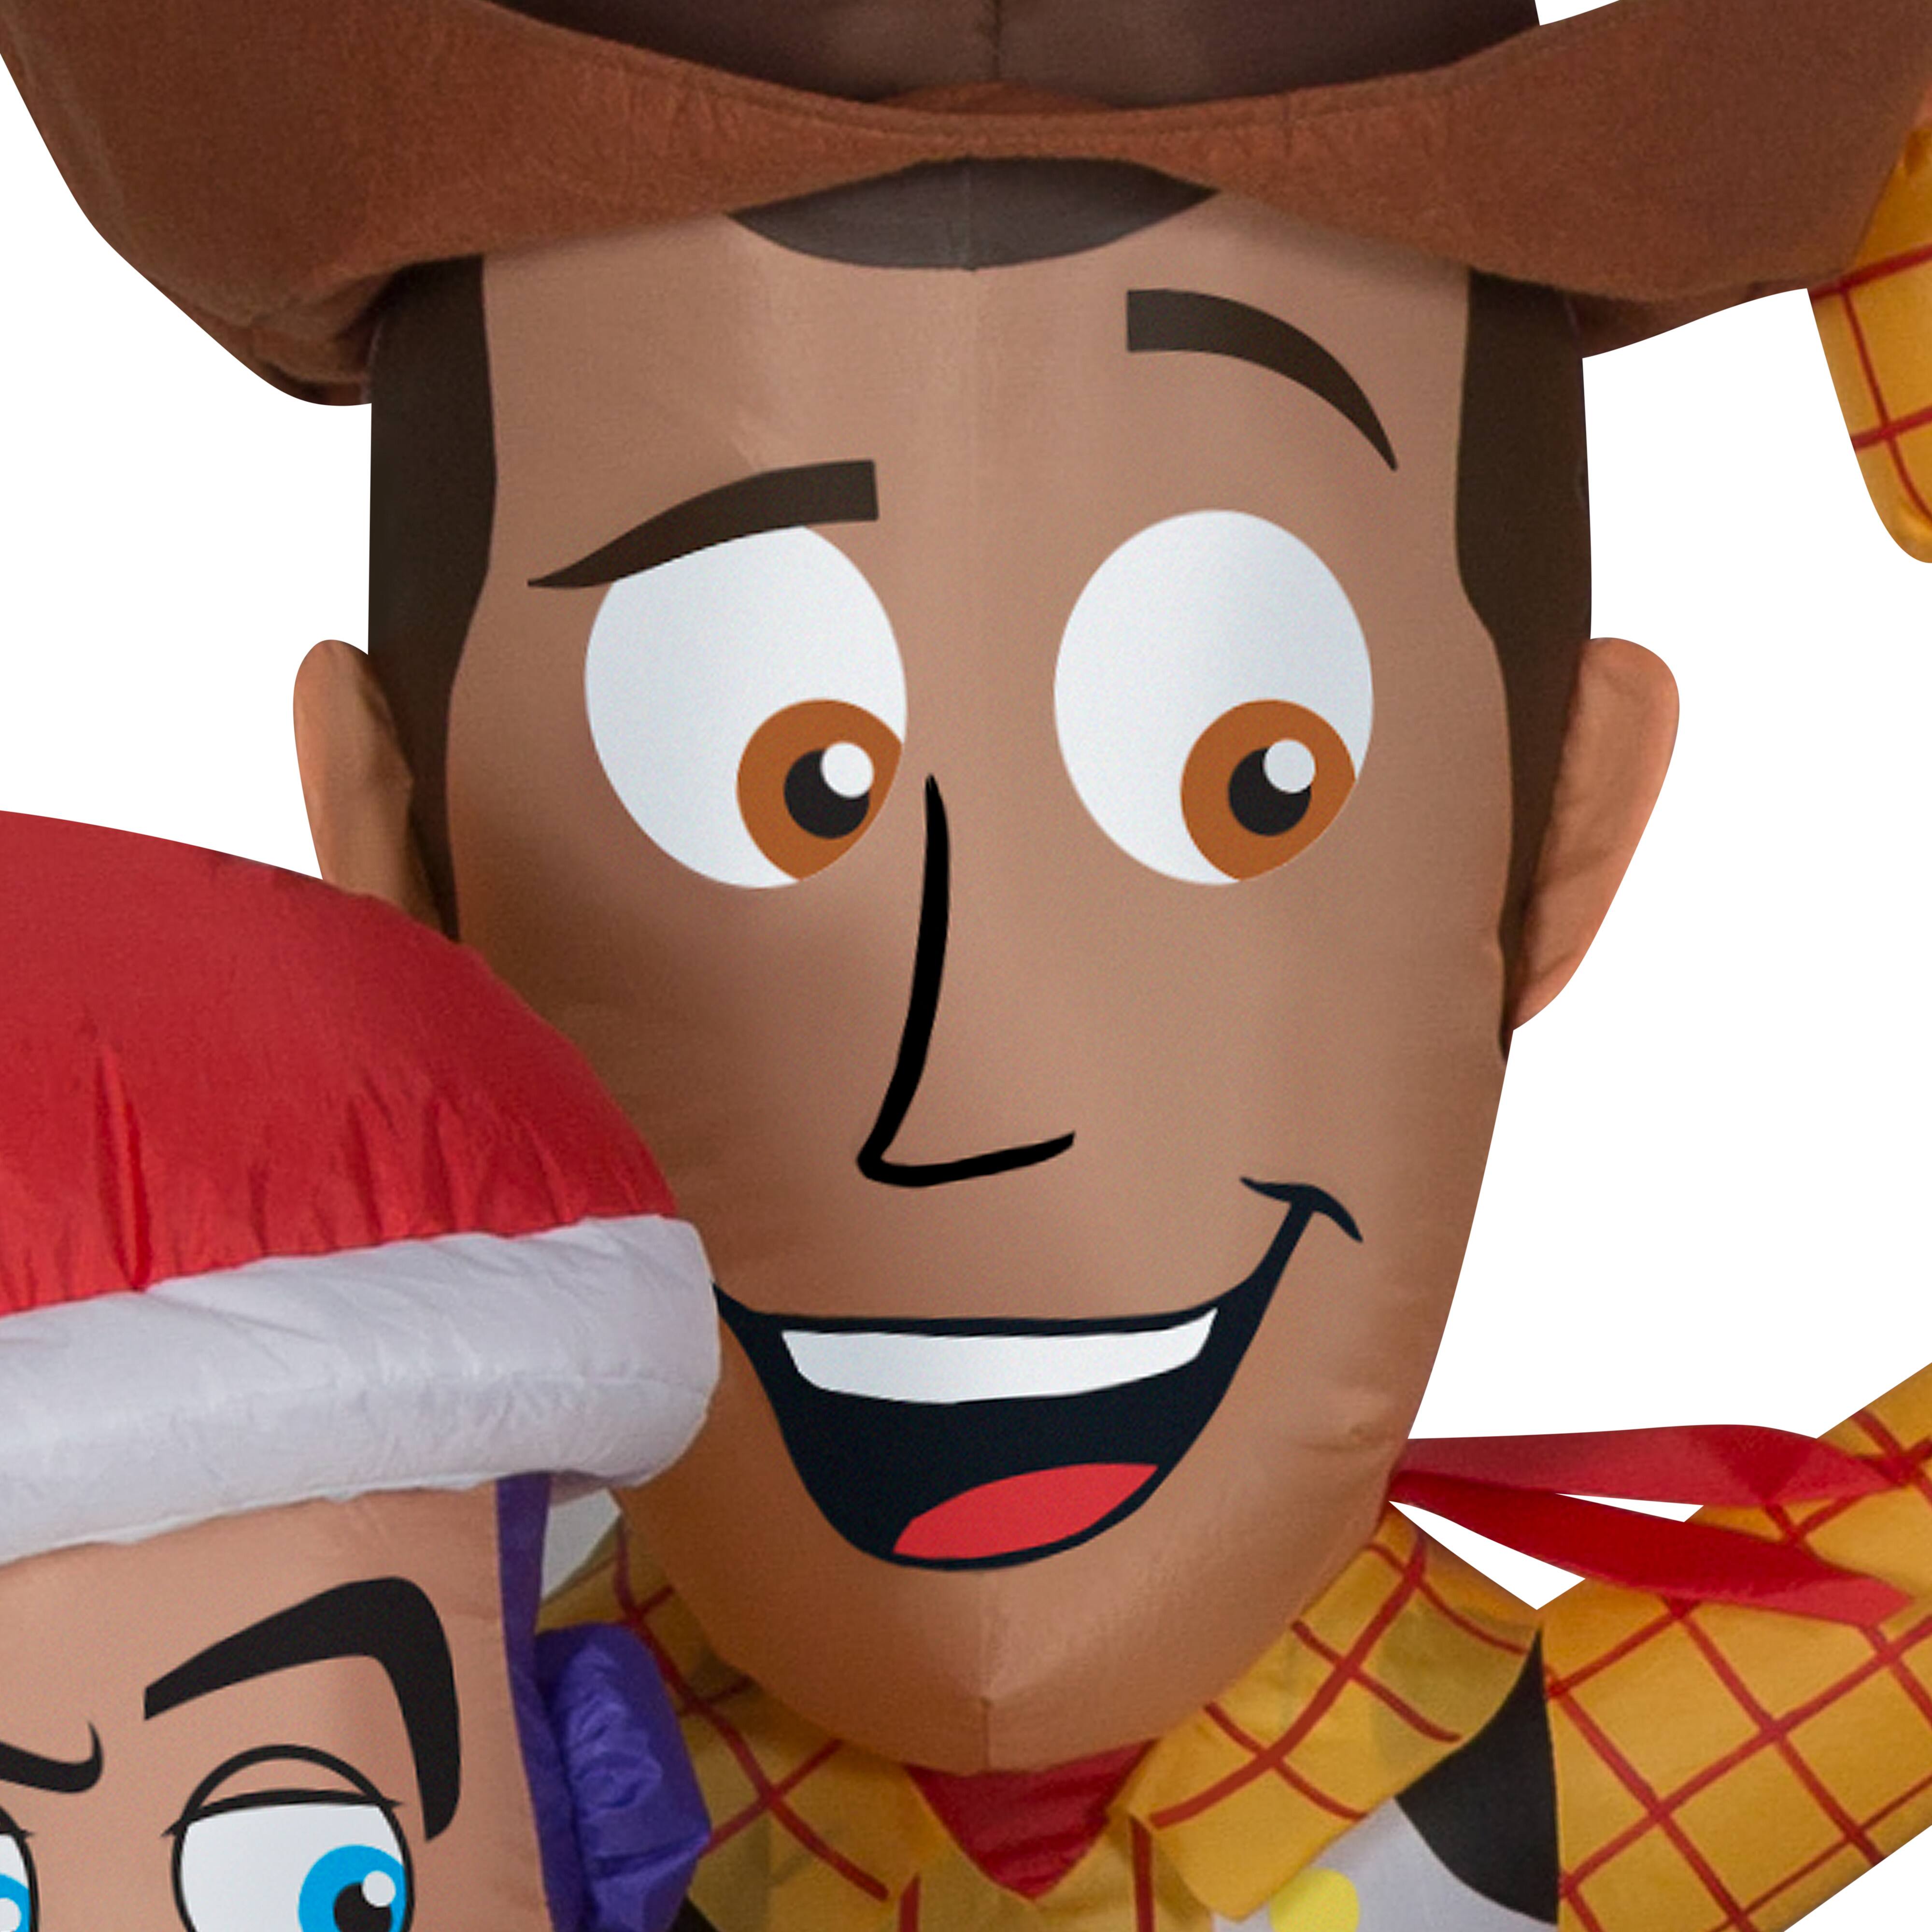 8ft. Airblown&#xAE; Inflatable Christmas Toy Story with Sleigh